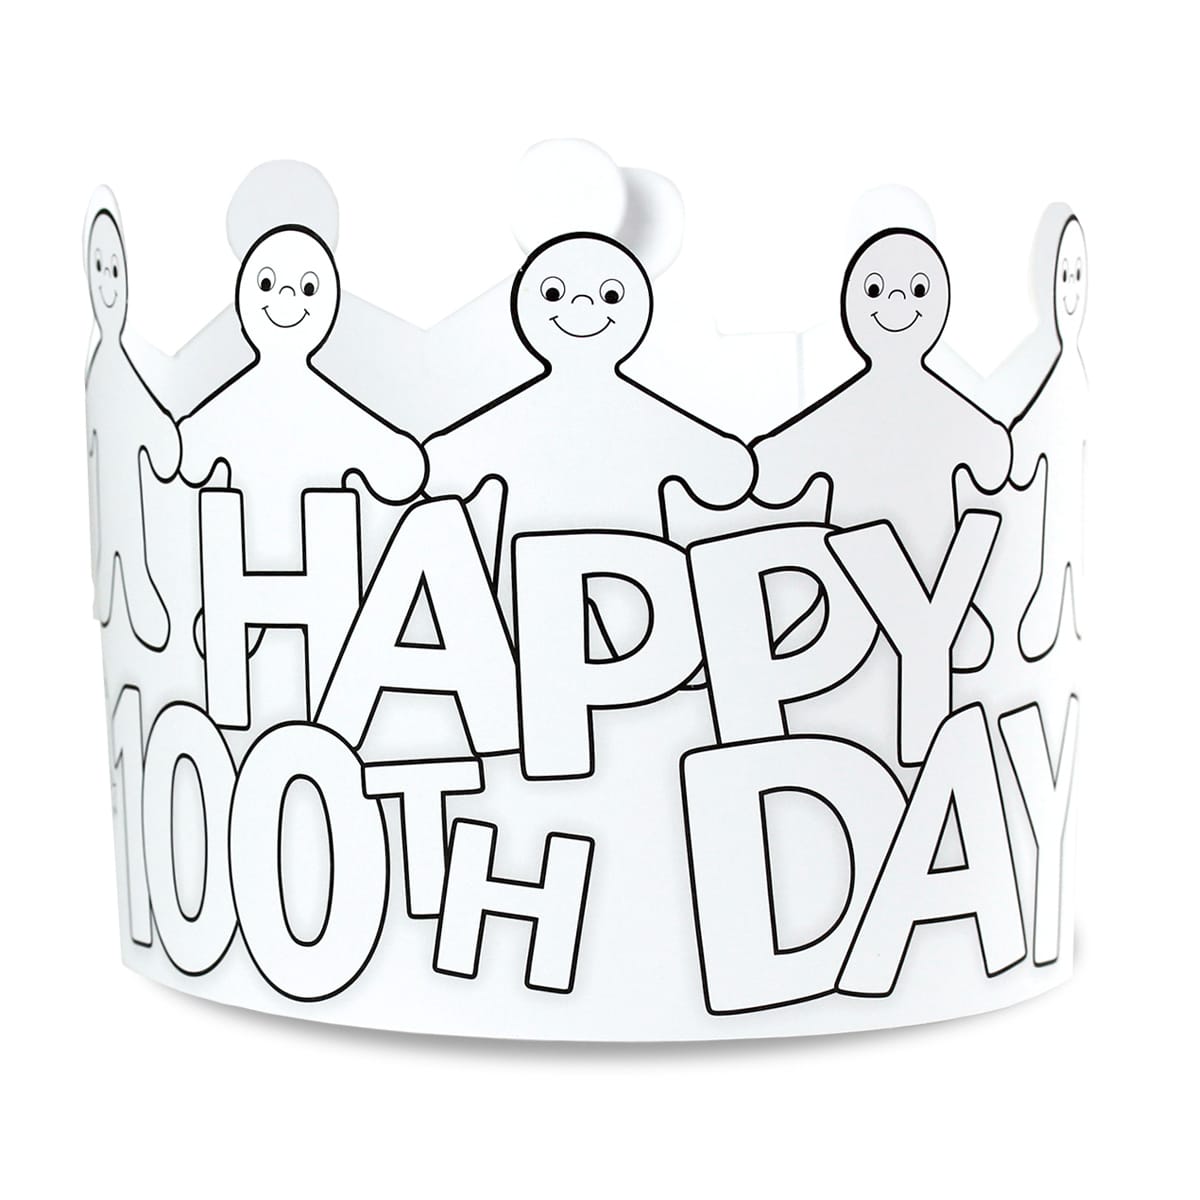 Crowns- Happy 100th Day (Black &White) 24 Ct.